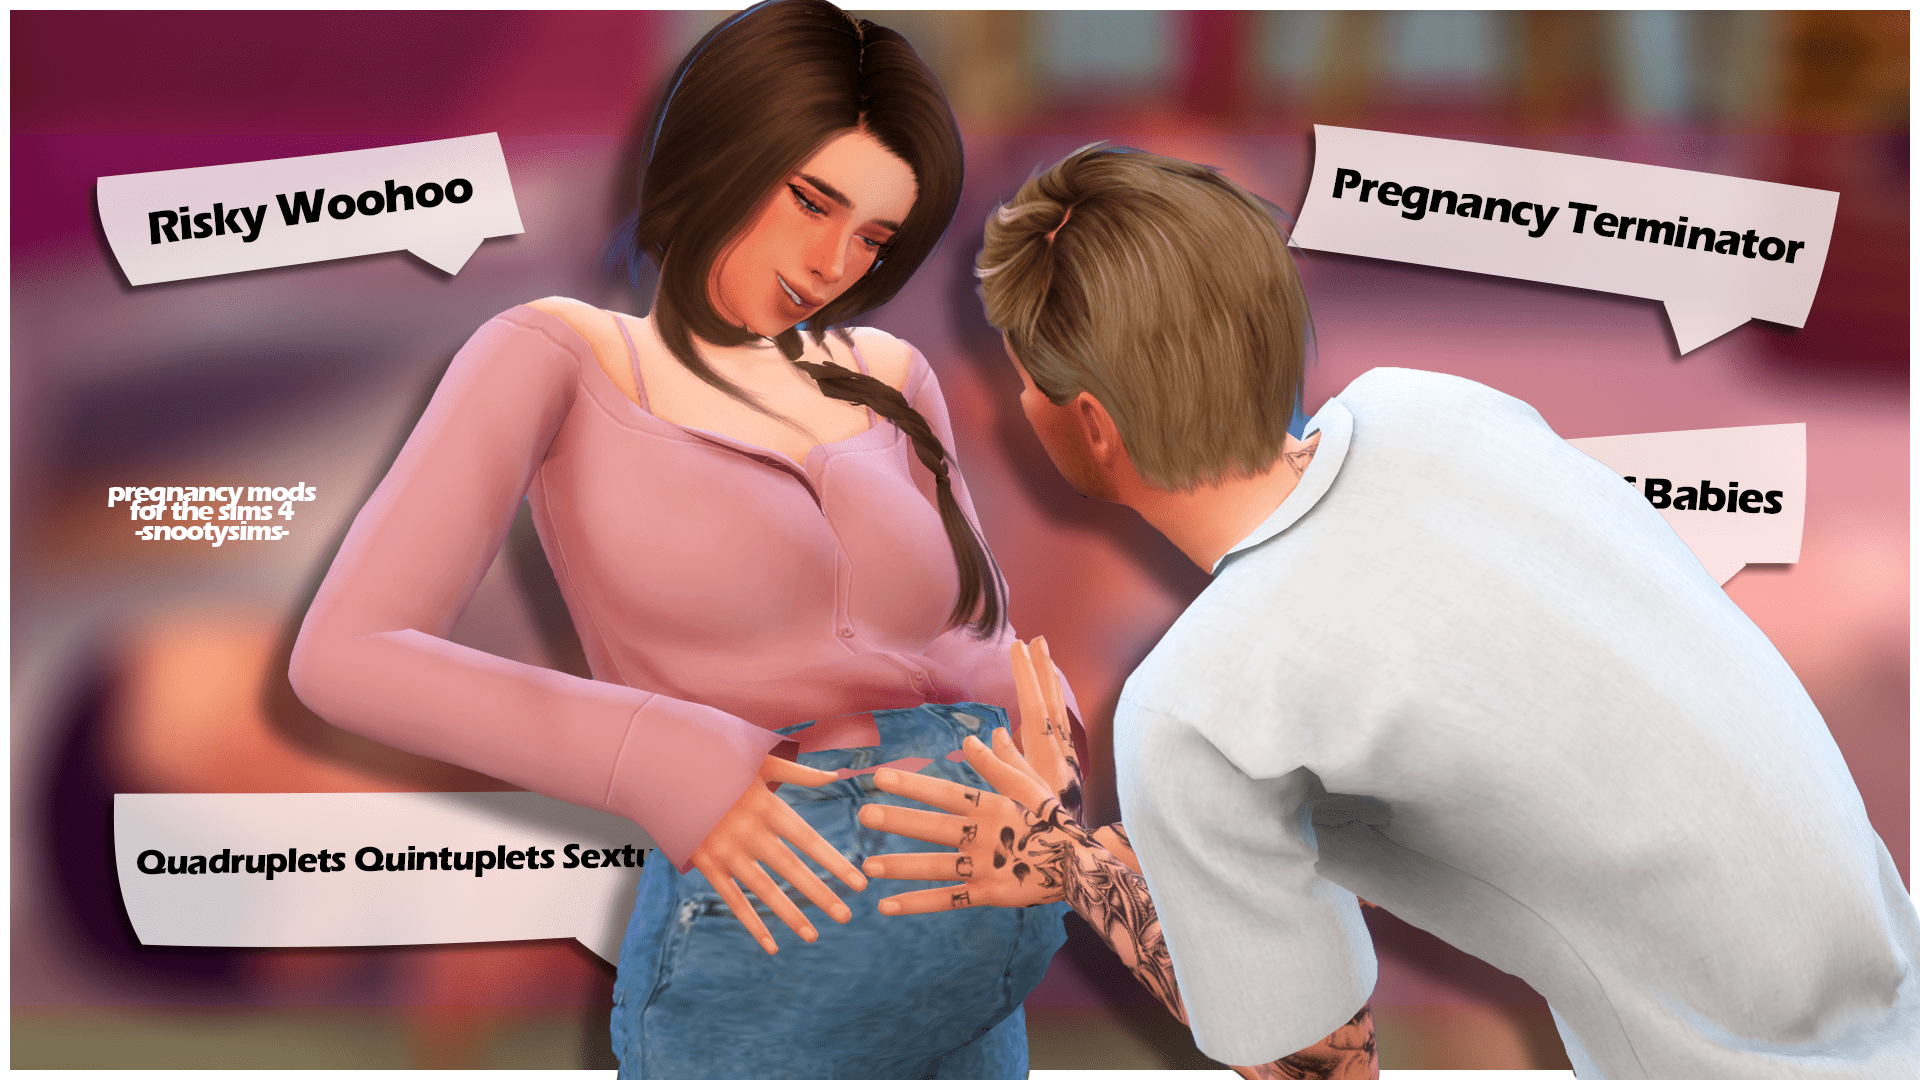 20+ Sims 4 Pregnancy Poses to Get the Best Pregnancy Screenshots